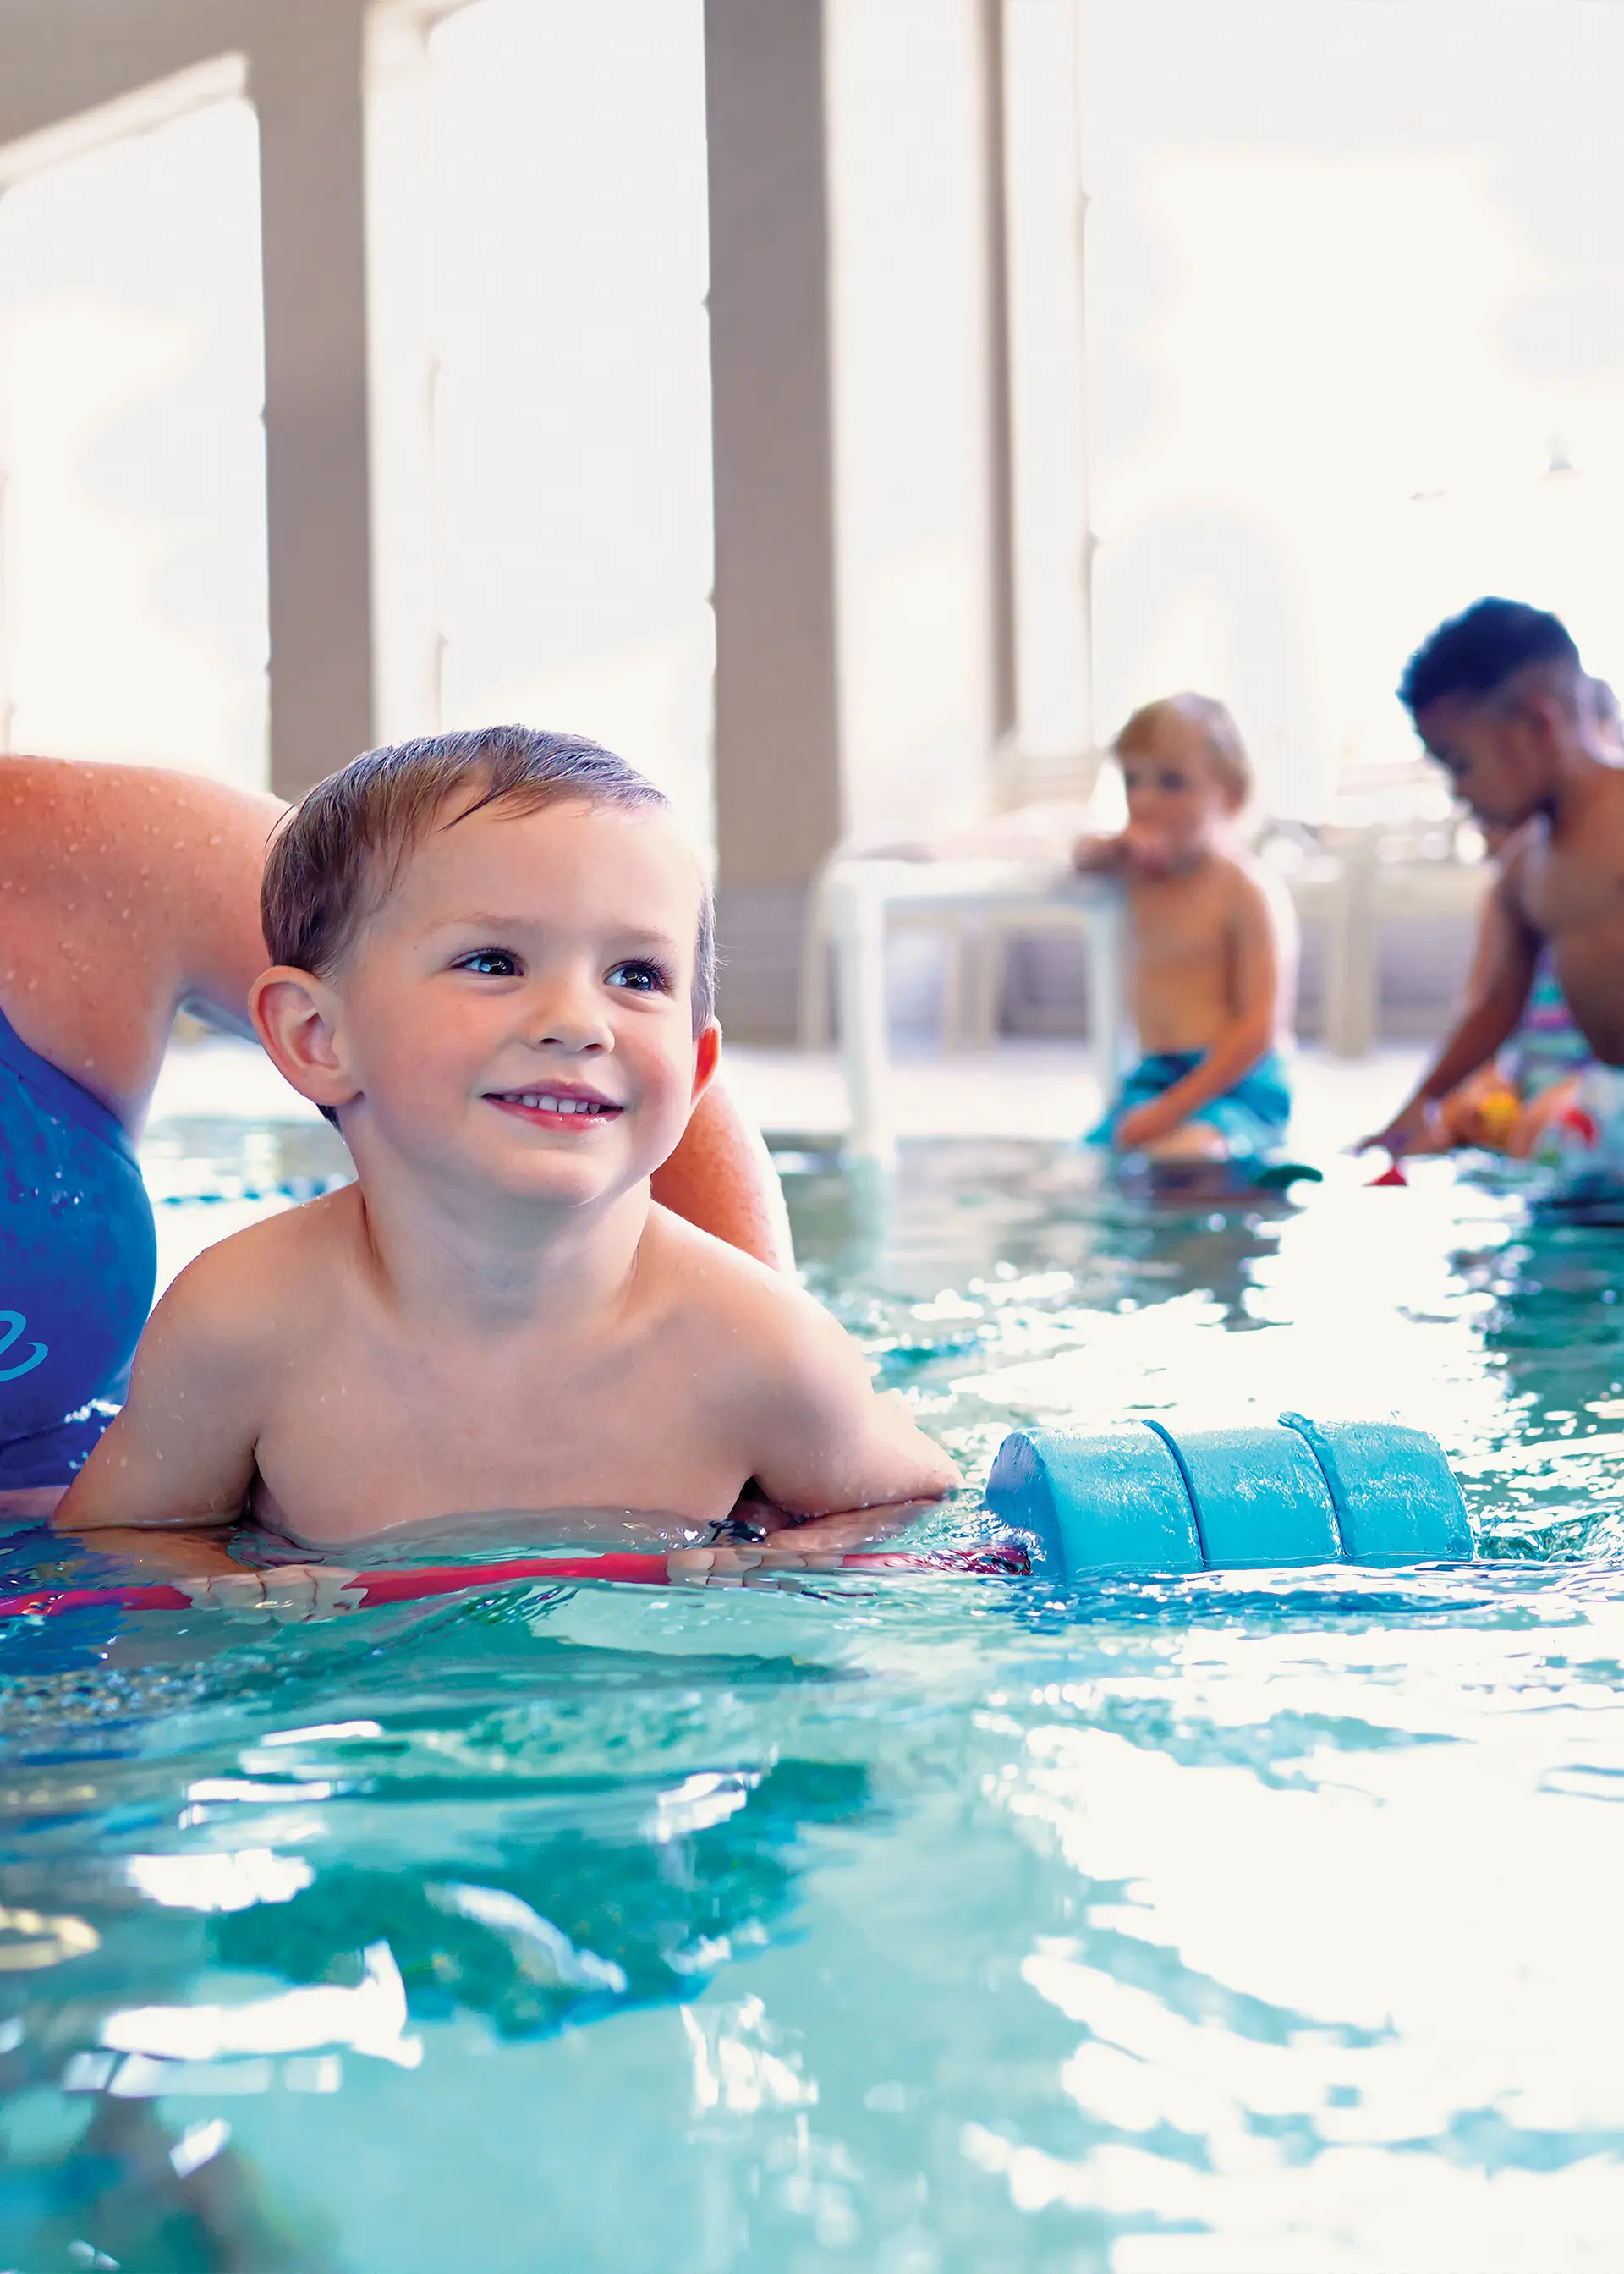 A smiling child swimming in an indoor pool assisted by a flotation device and an adult.